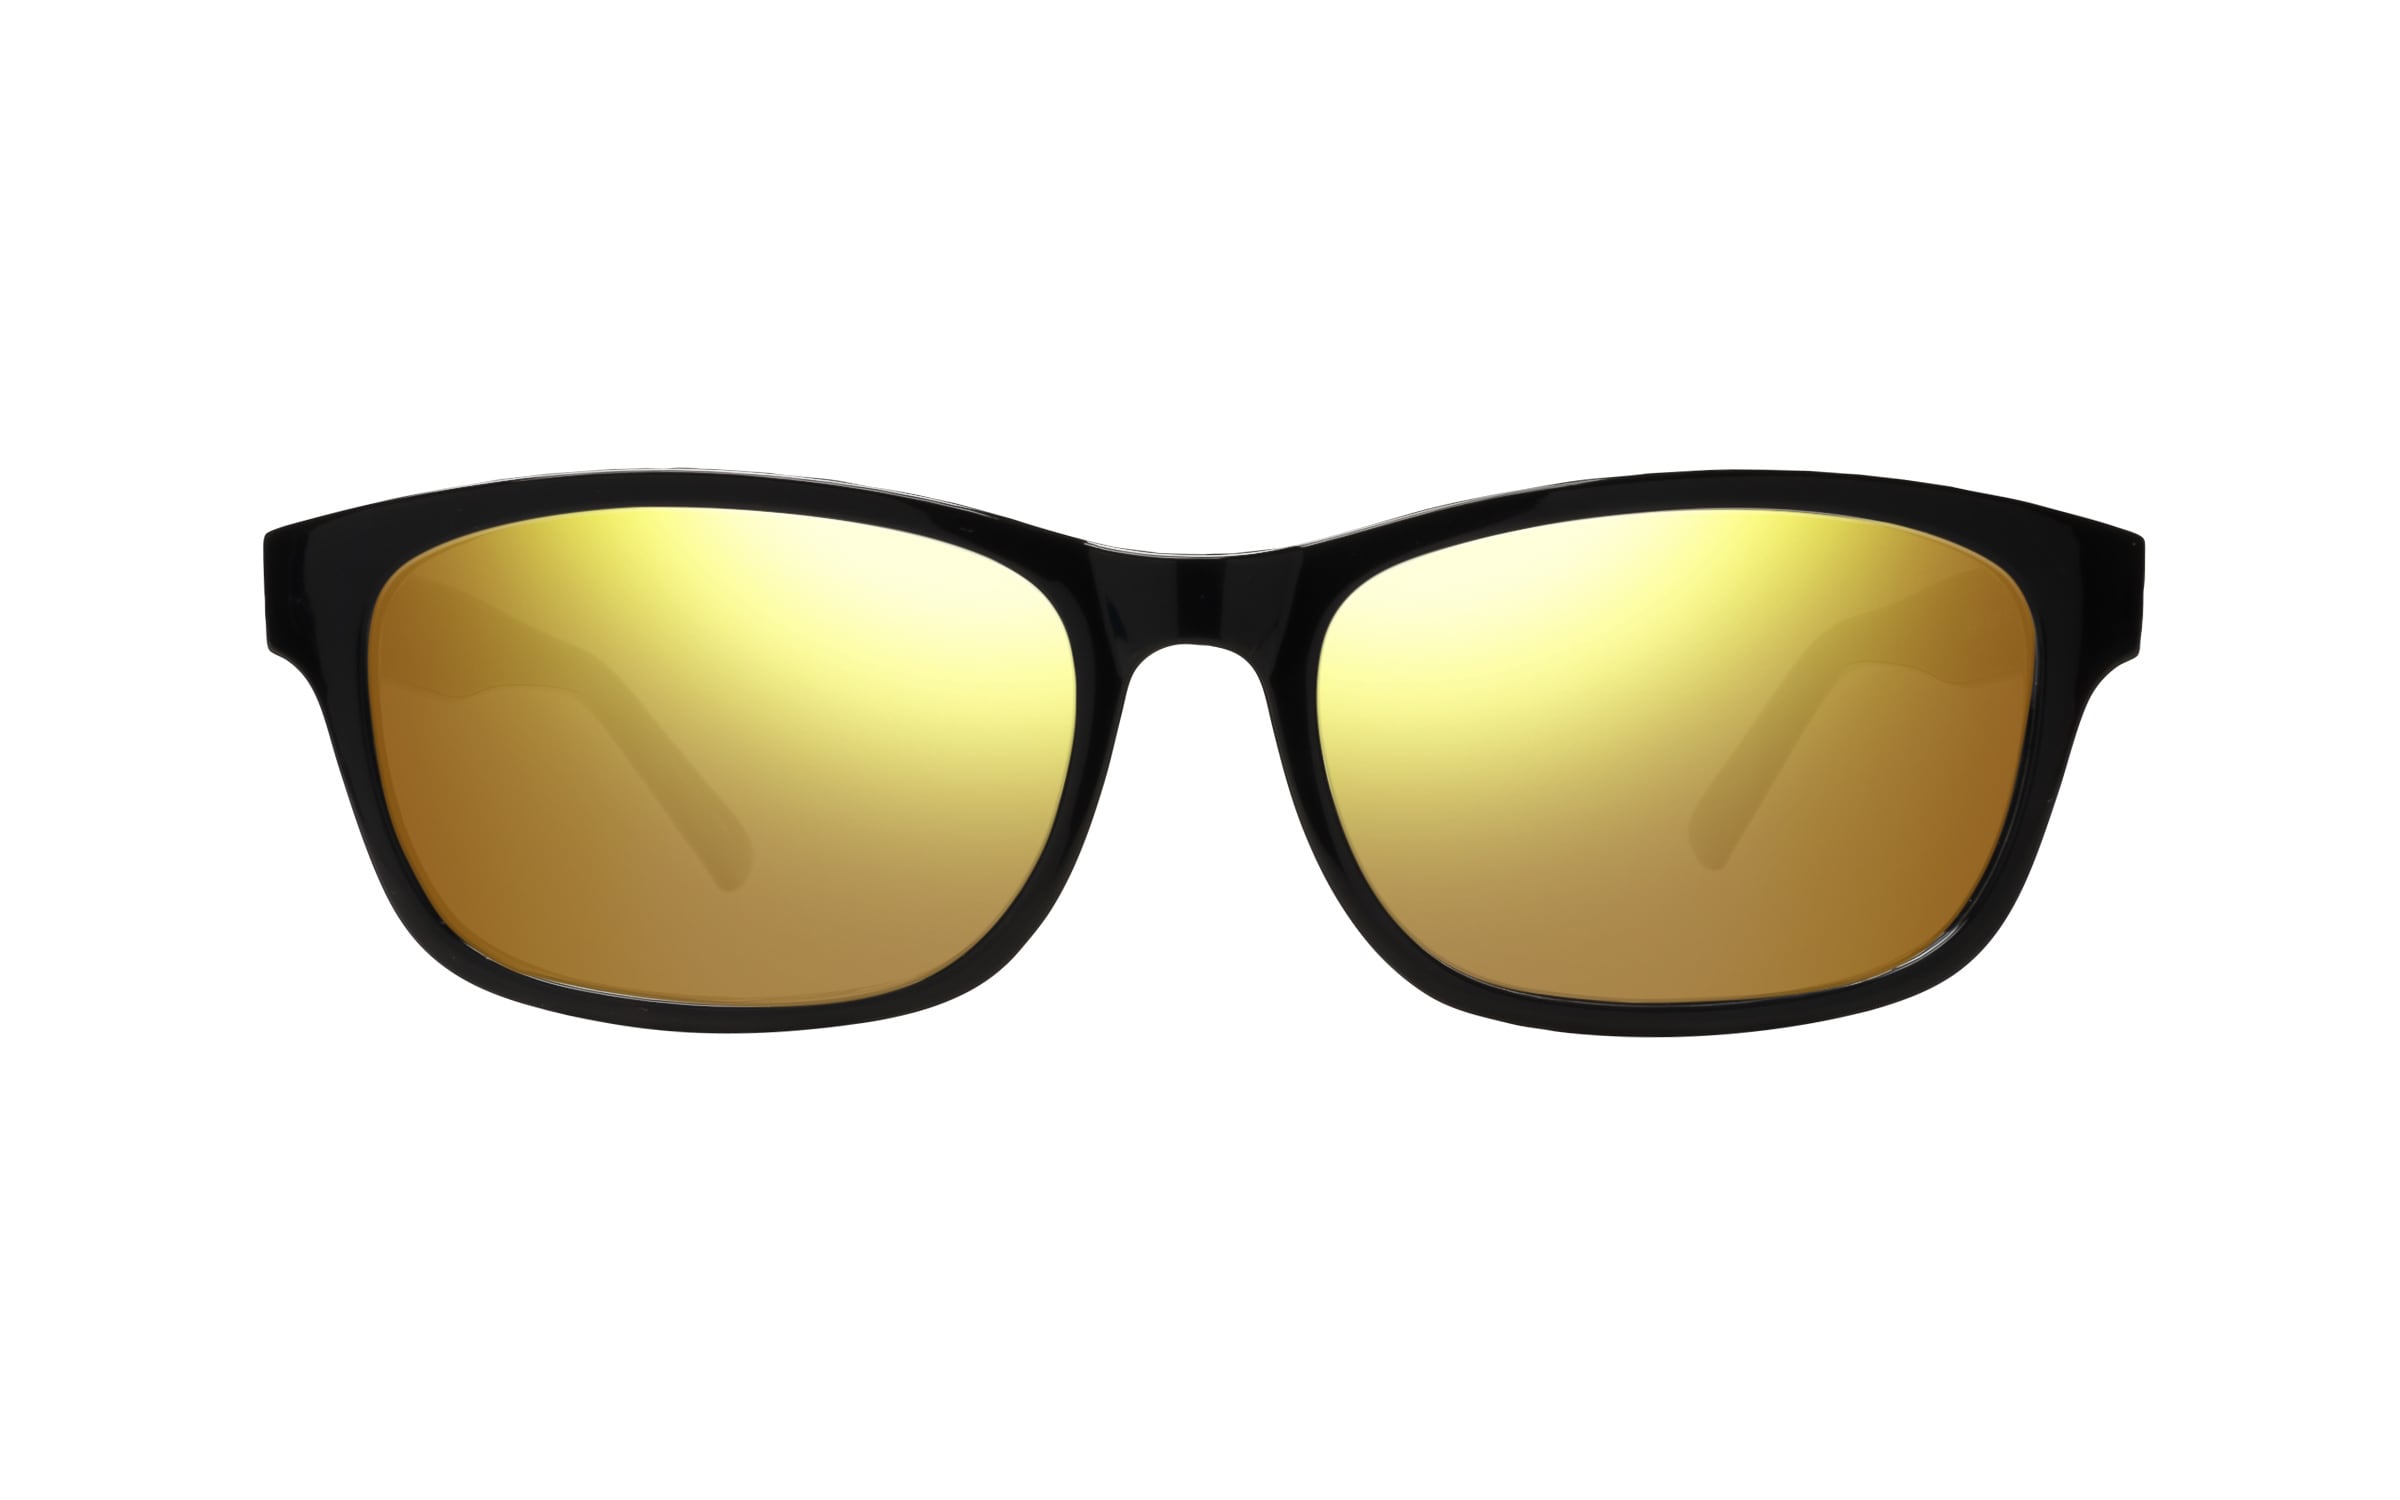 Tinted sunglasses | Clearly